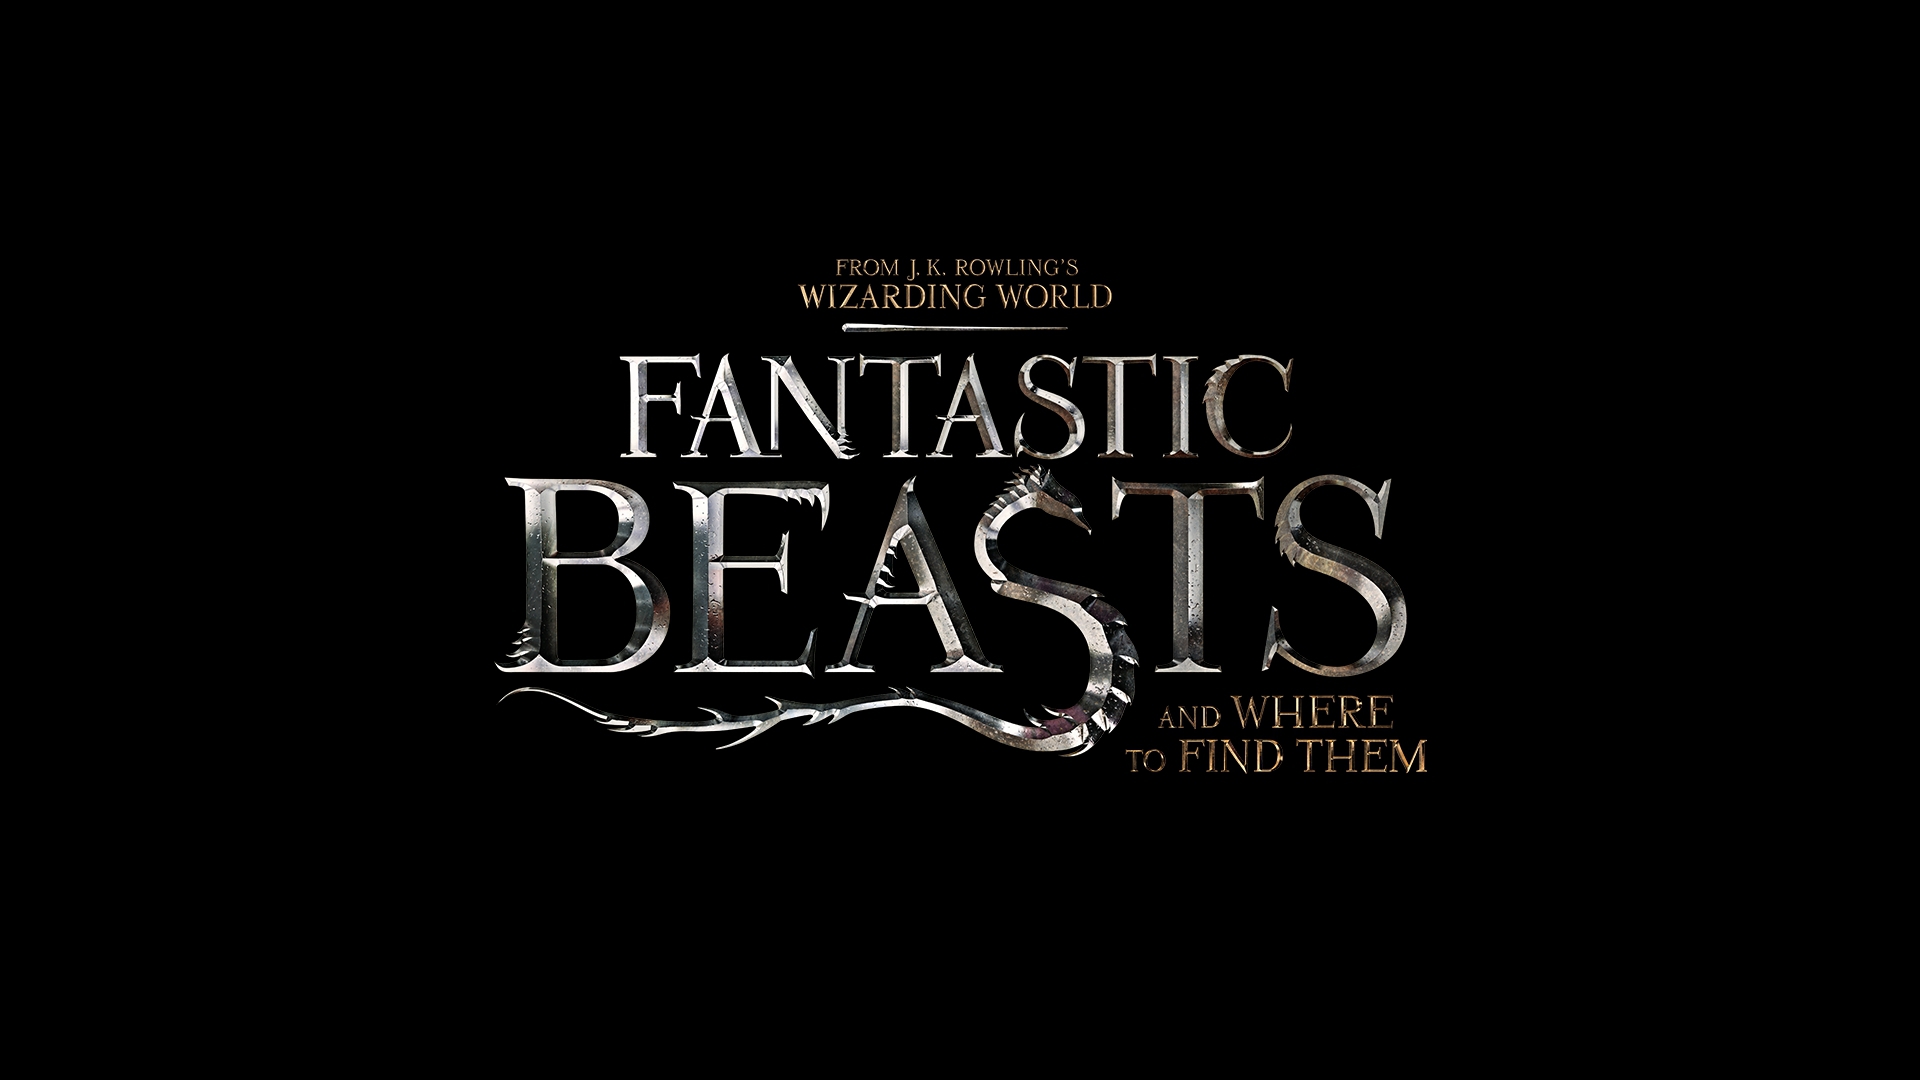 Movie Watch Full HD Online Fantastic Beasts And Where To Find Them 2016